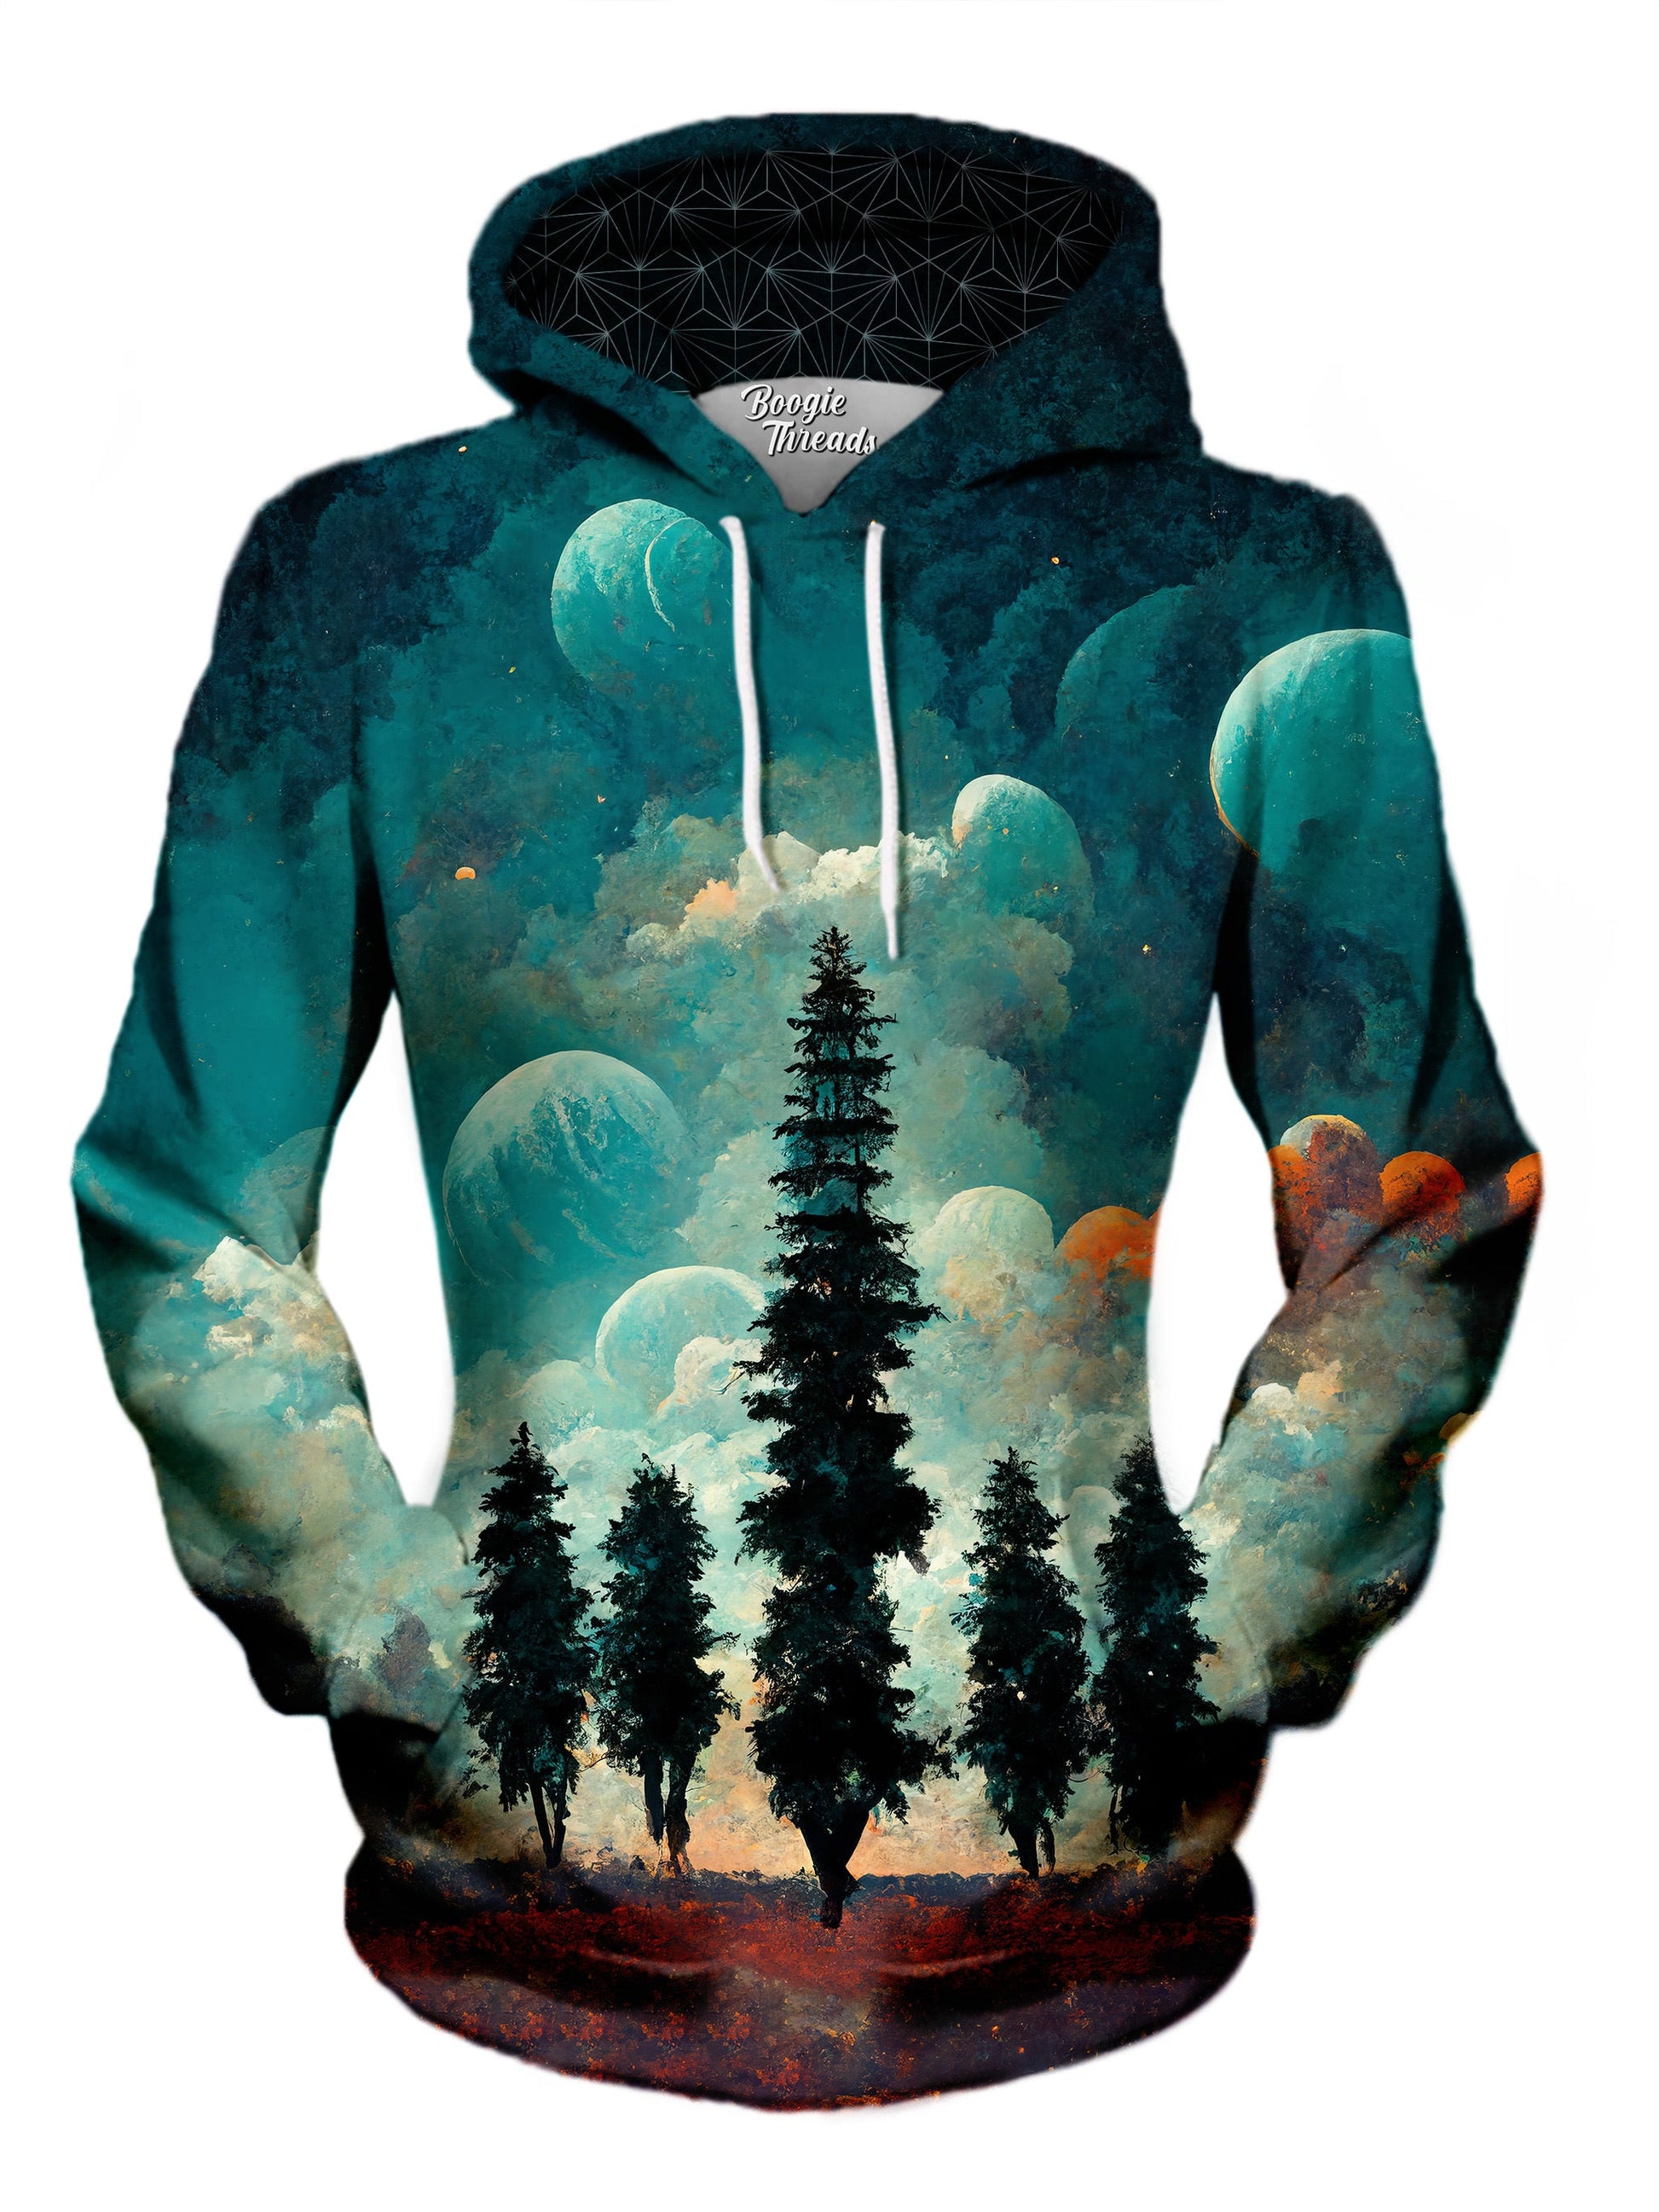 Composed Spring Unisex Pullover Hoodie - EDM Festival Clothing - Boogie Threads